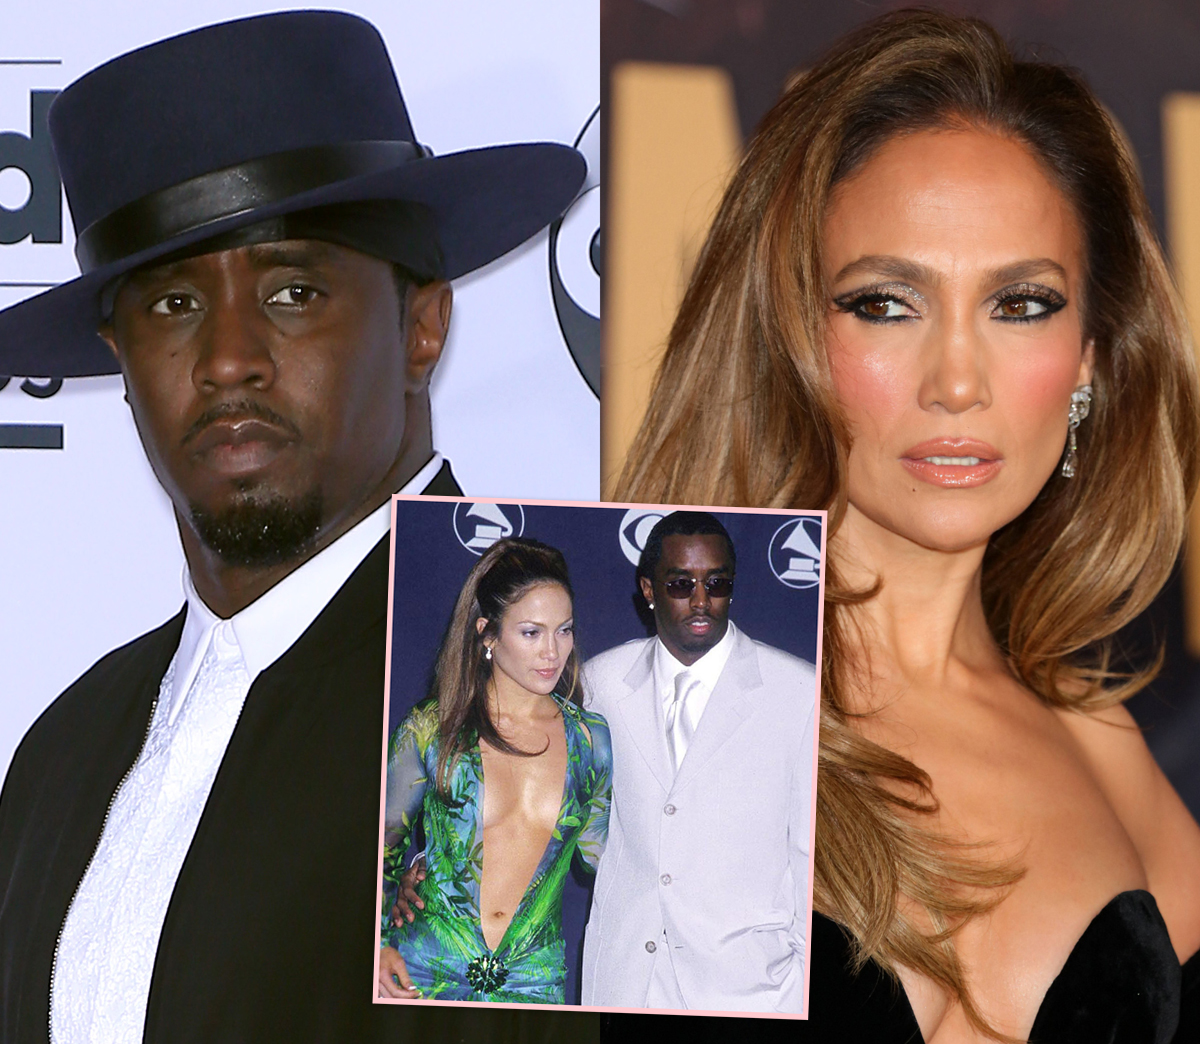 Fans revisiting Jennifer Lopez quotes about diddy relationship amid his ongoing legal issues